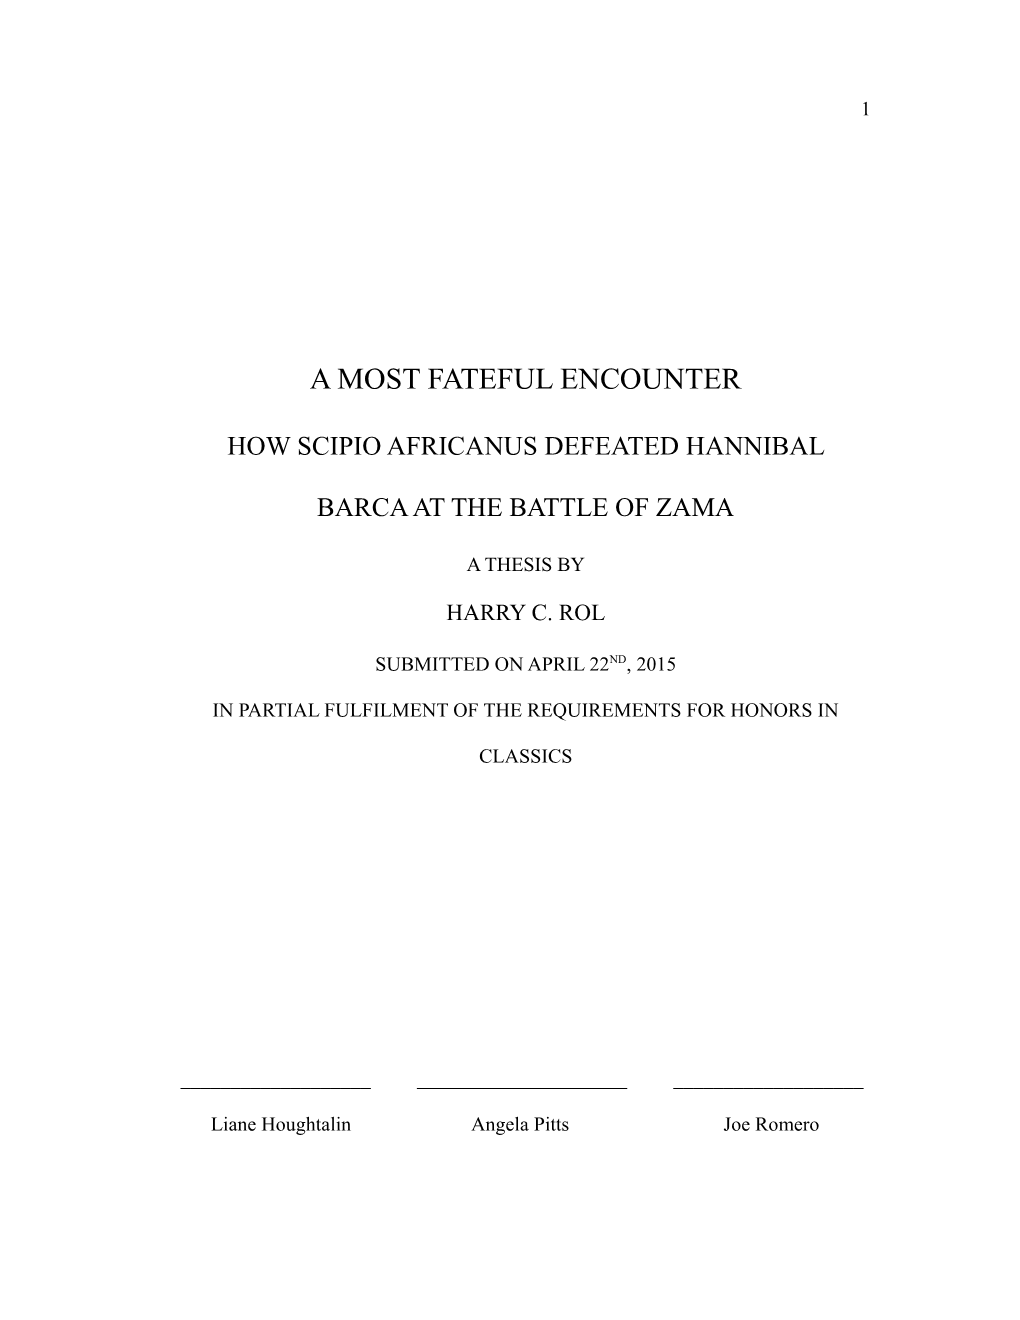 How Scipio Africanus Defeated Hannibal Barca at the Battle of Zama